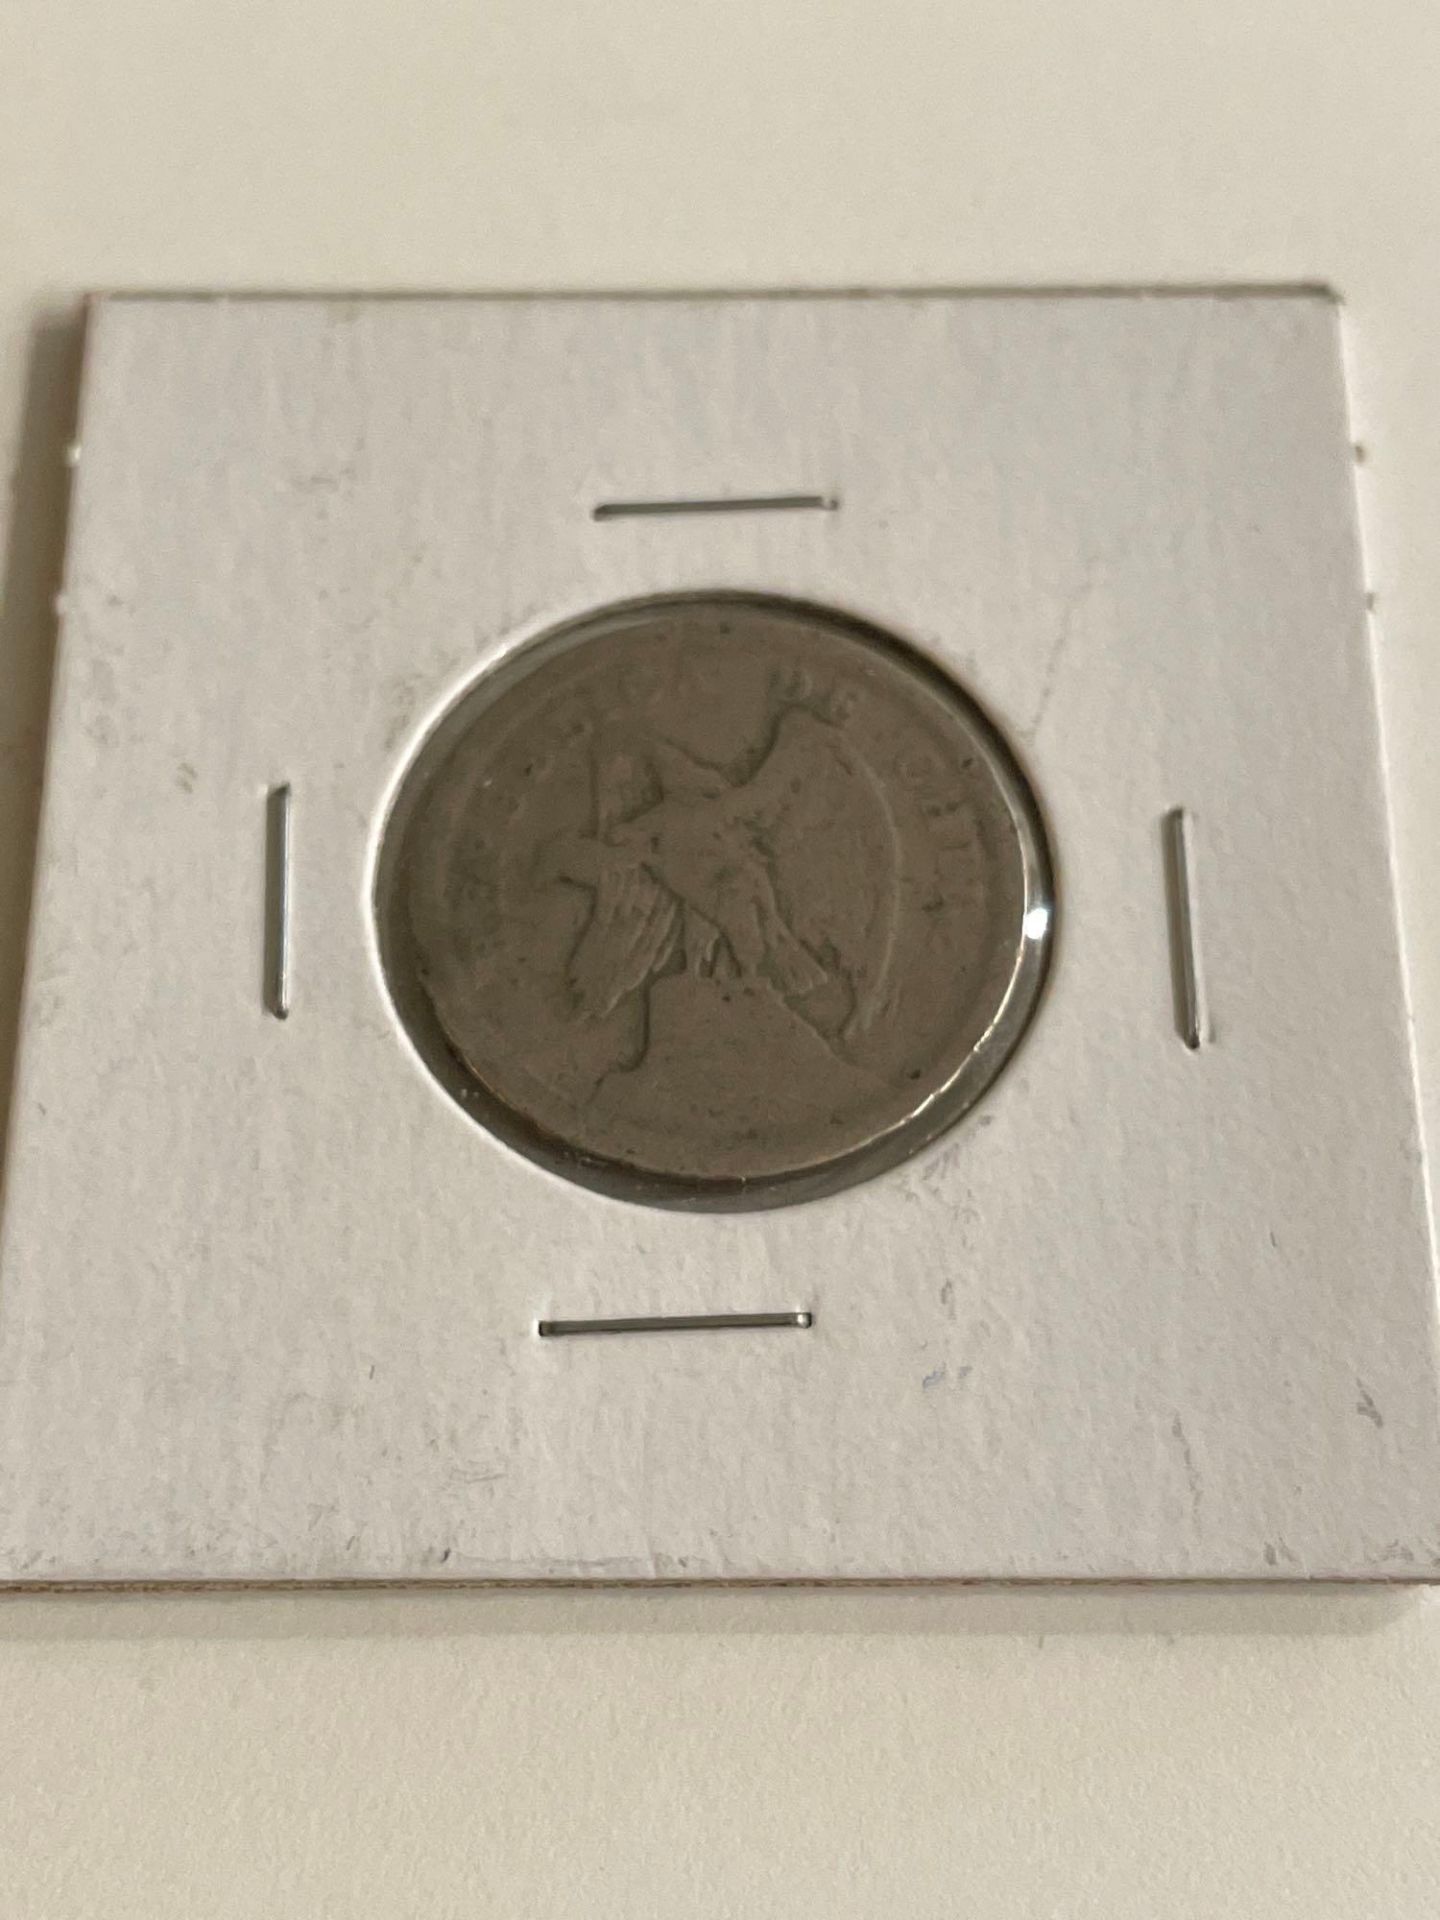 Foreign Coins - Image 5 of 11